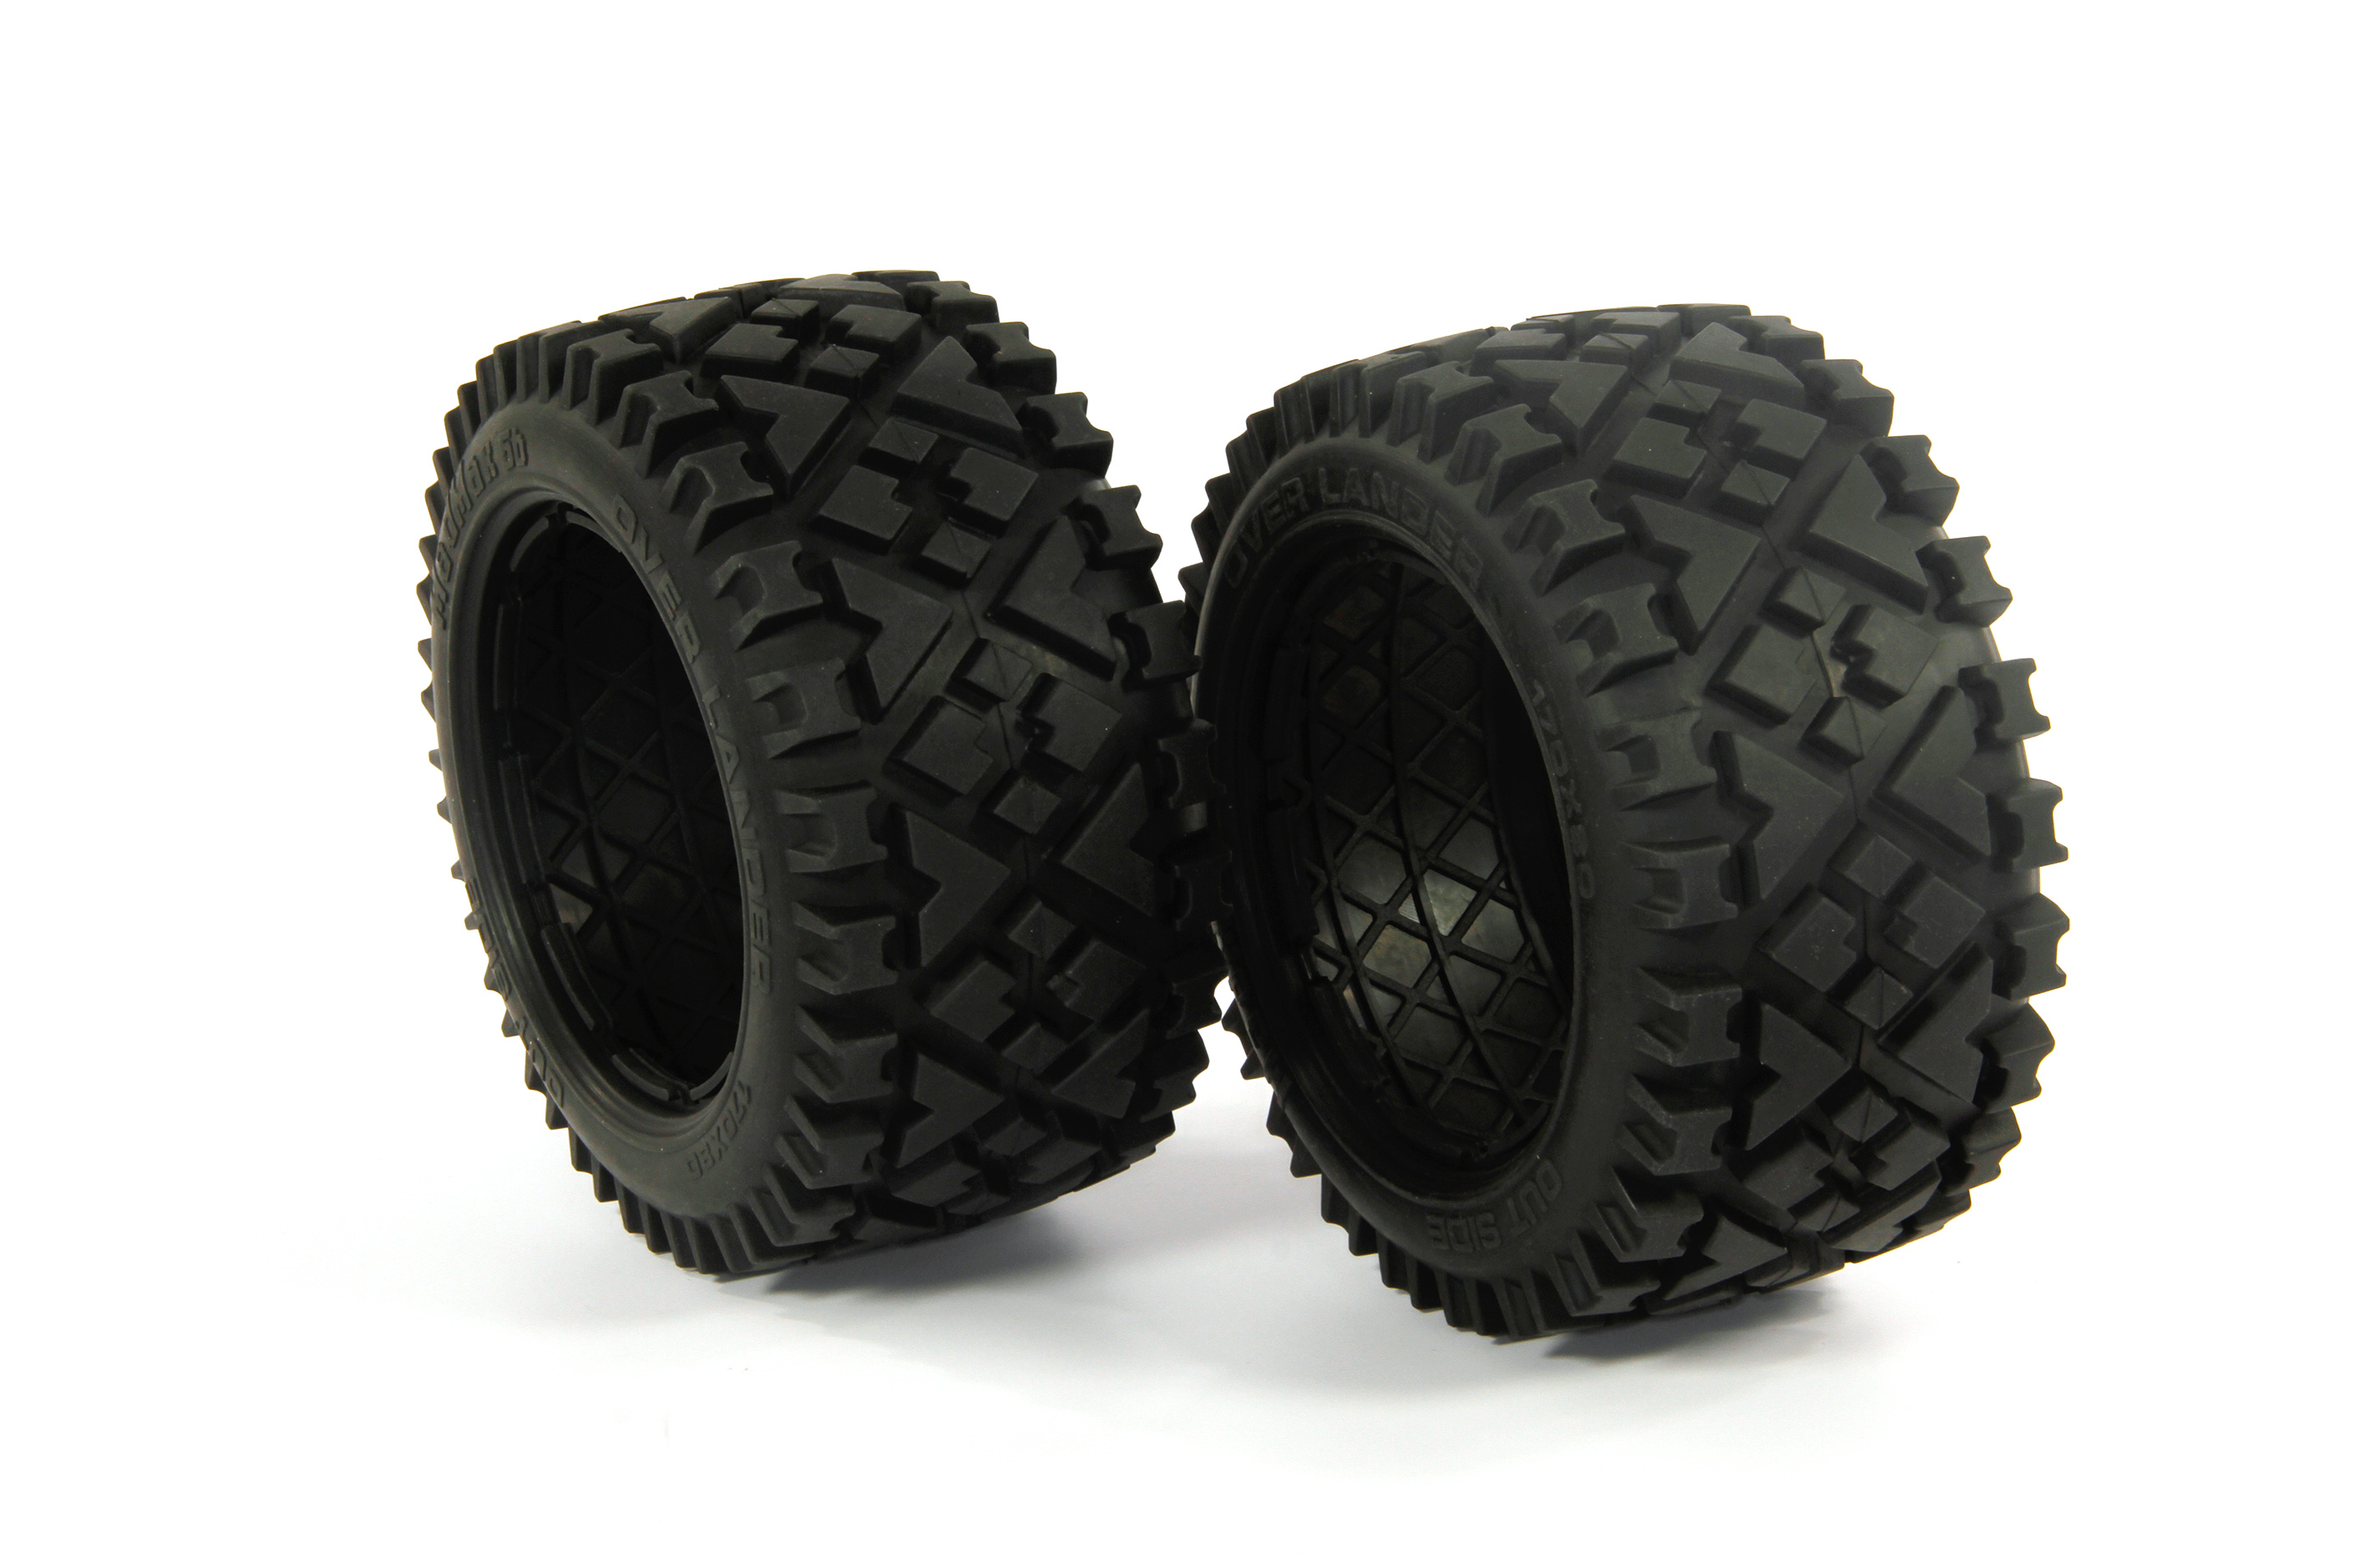 y1413/02 MadMax OVER LANDER one pair rear tires 80 mm